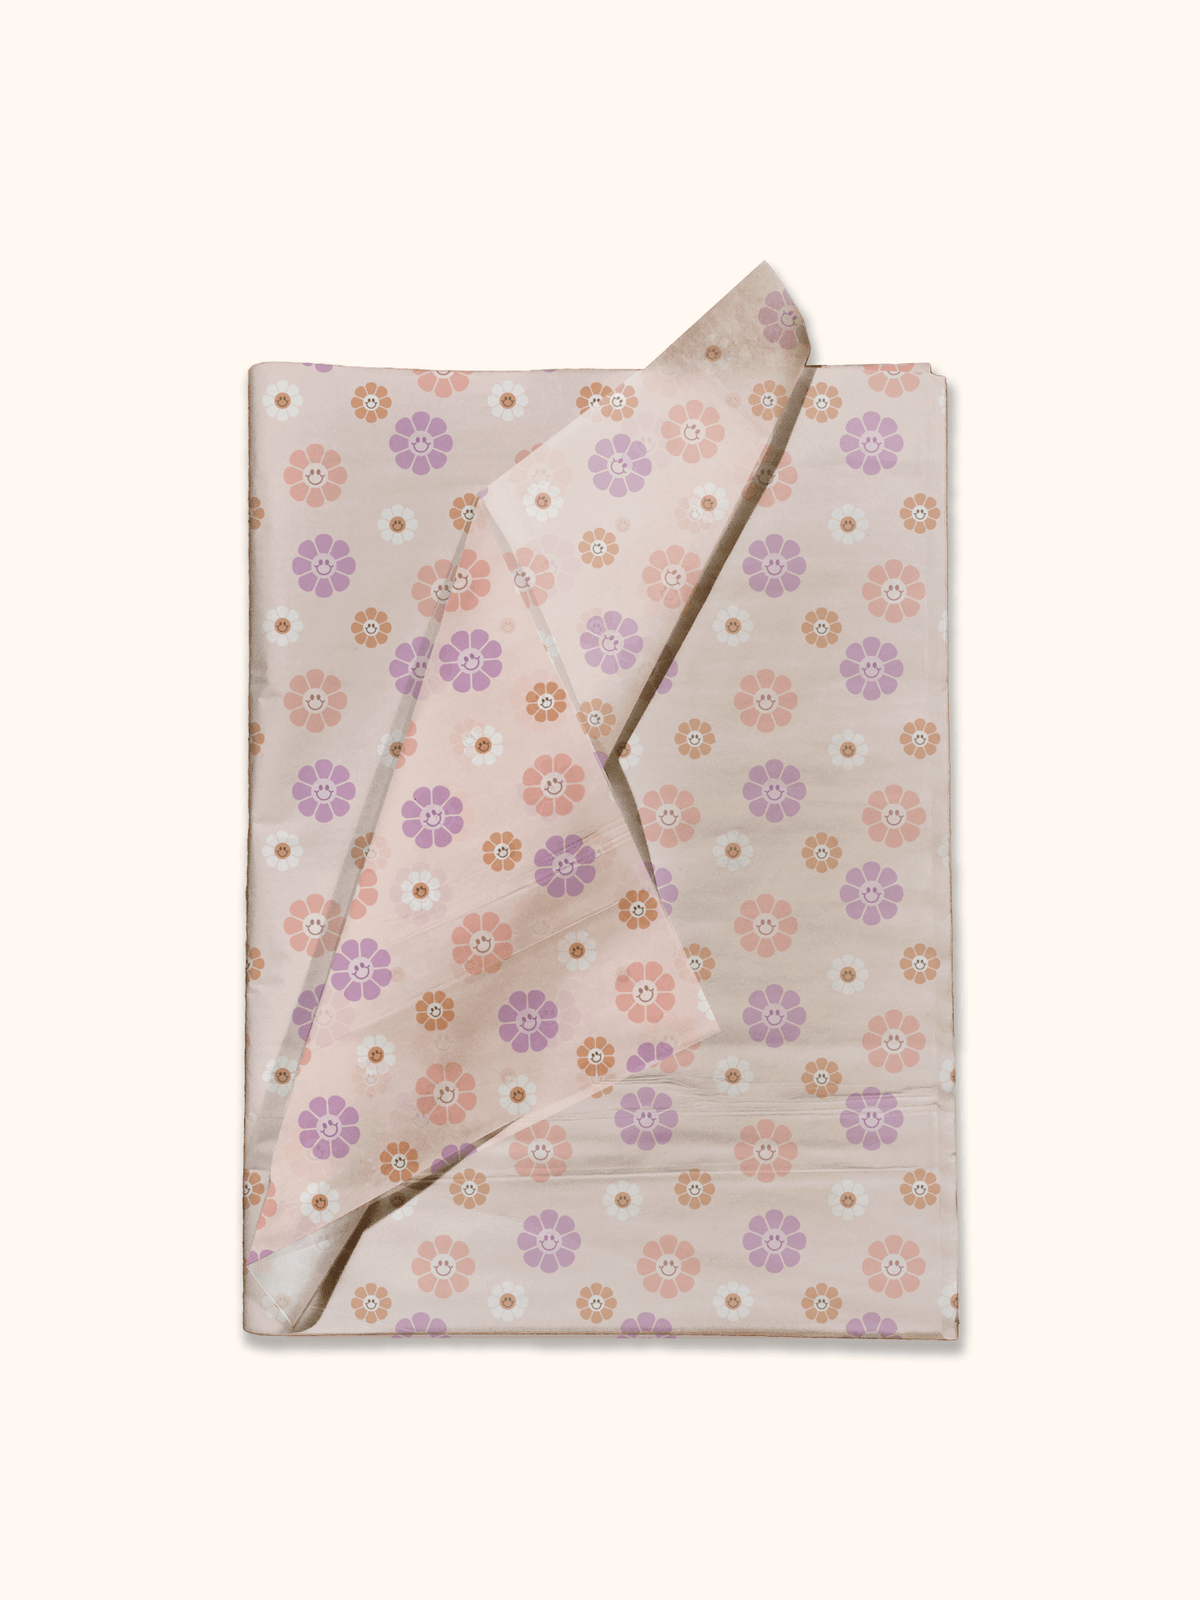 Watercolor Floral Tissue Paper - Pattern Retail Tissue - 20 x 30 in., Wholesale Color Tissue for Retail